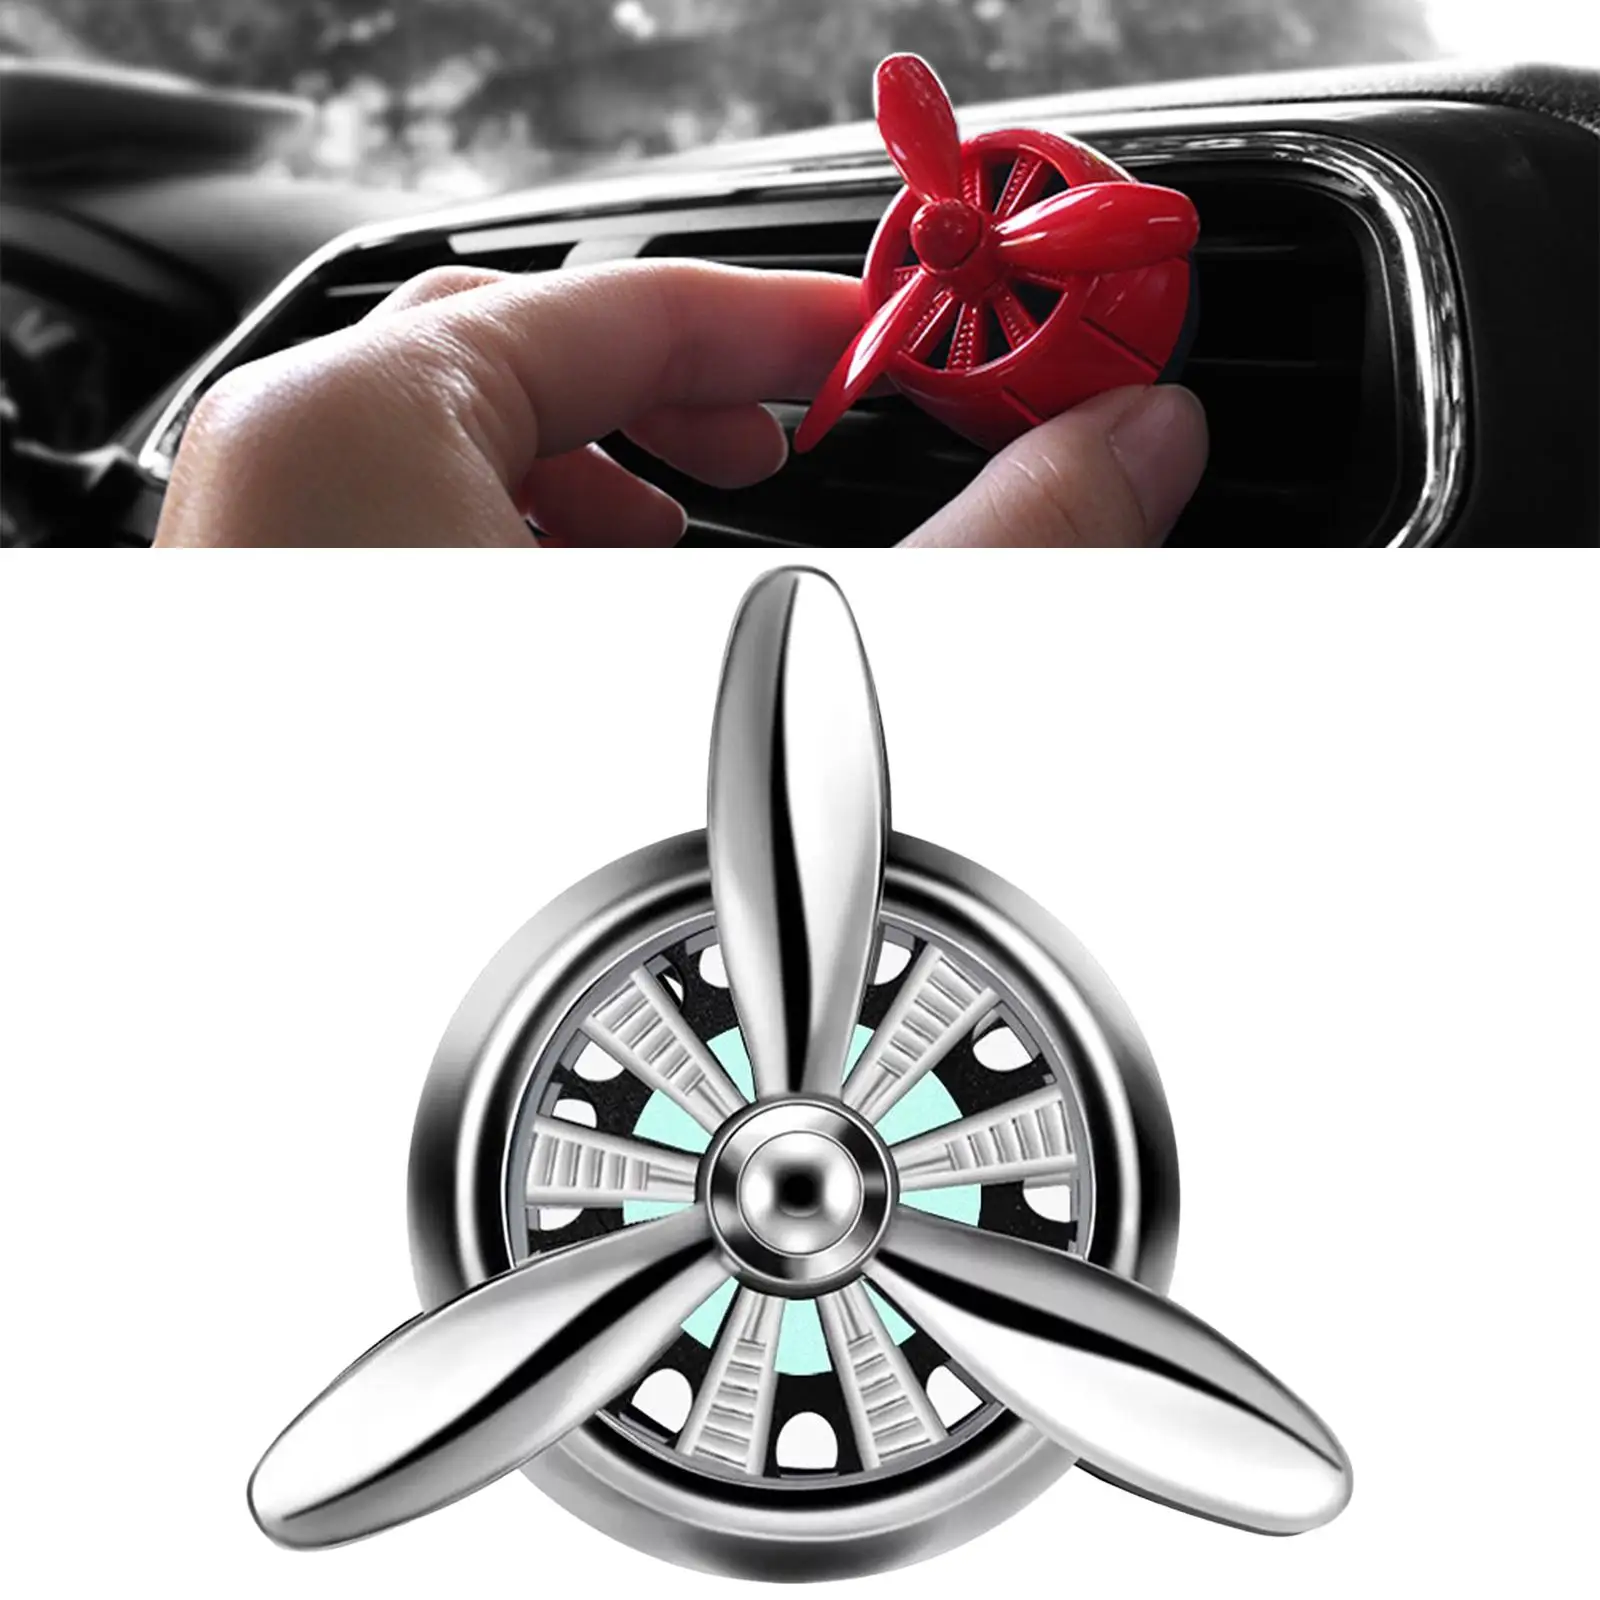 Car Air Freshener Vent Clip Propeller Vent Clip Fresh Aromatherapy Air Force Propeller Shape Car Essential Oil Diffuser Family